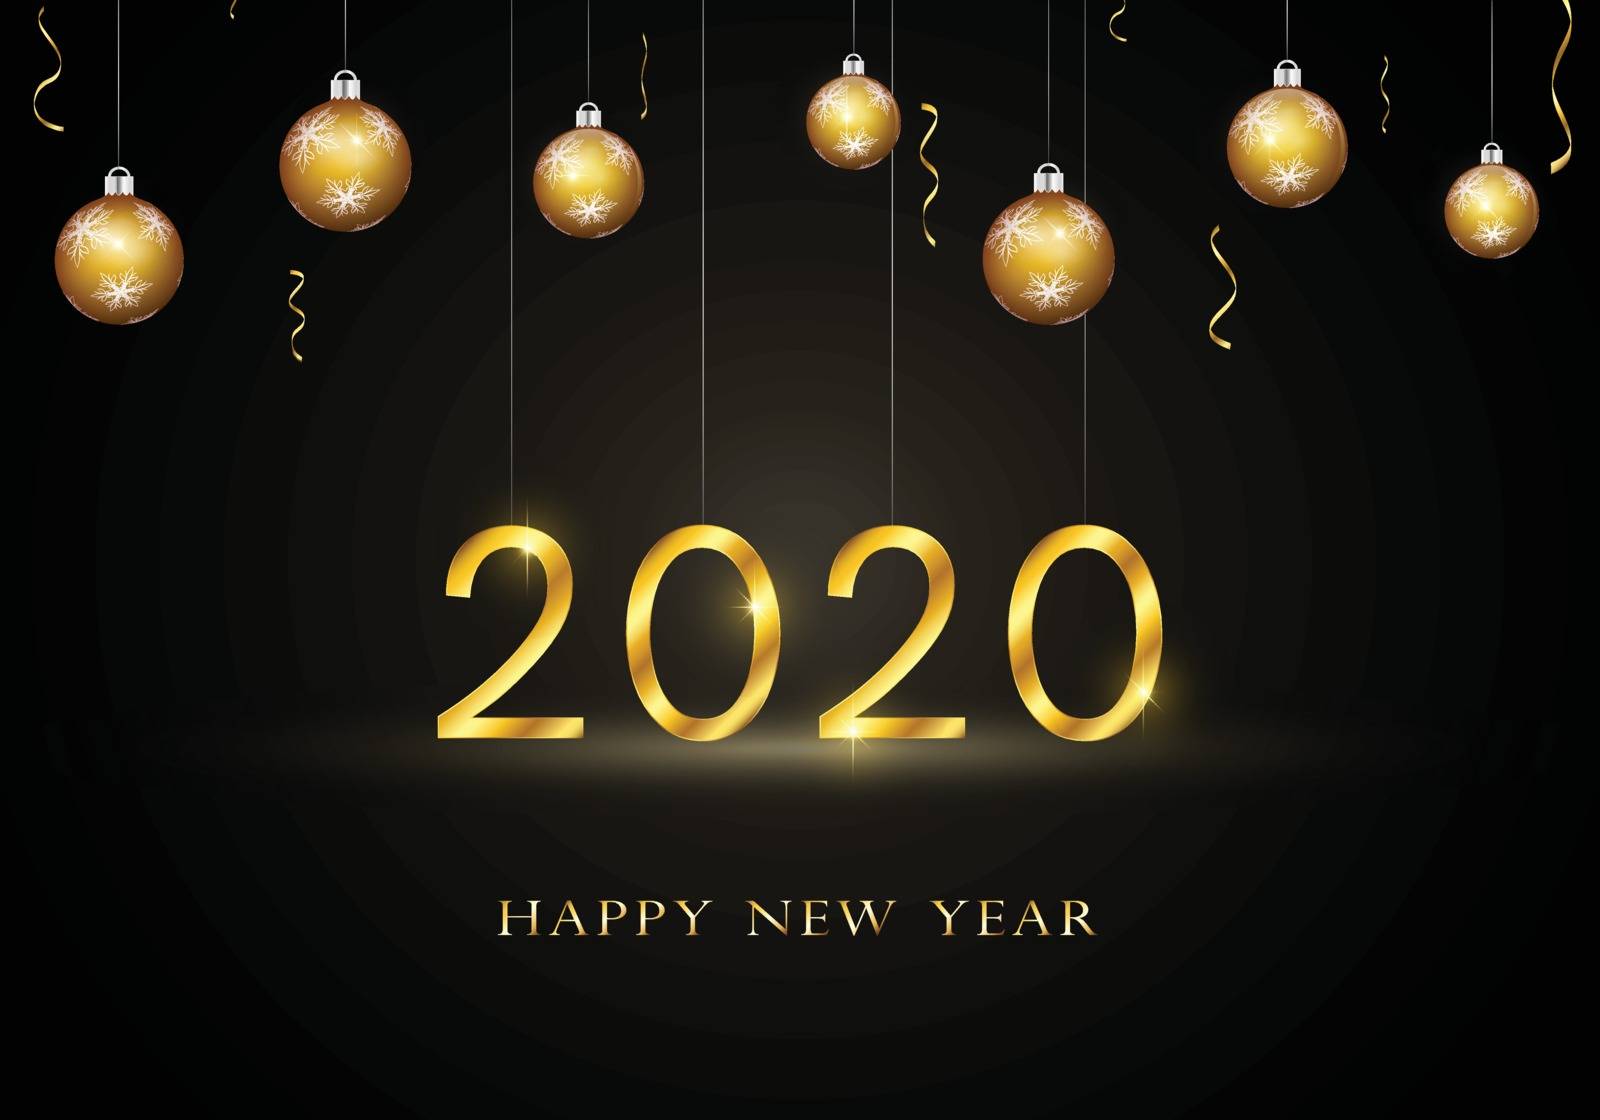 2020 Happy New Year background with gold text. by GraffiTimi